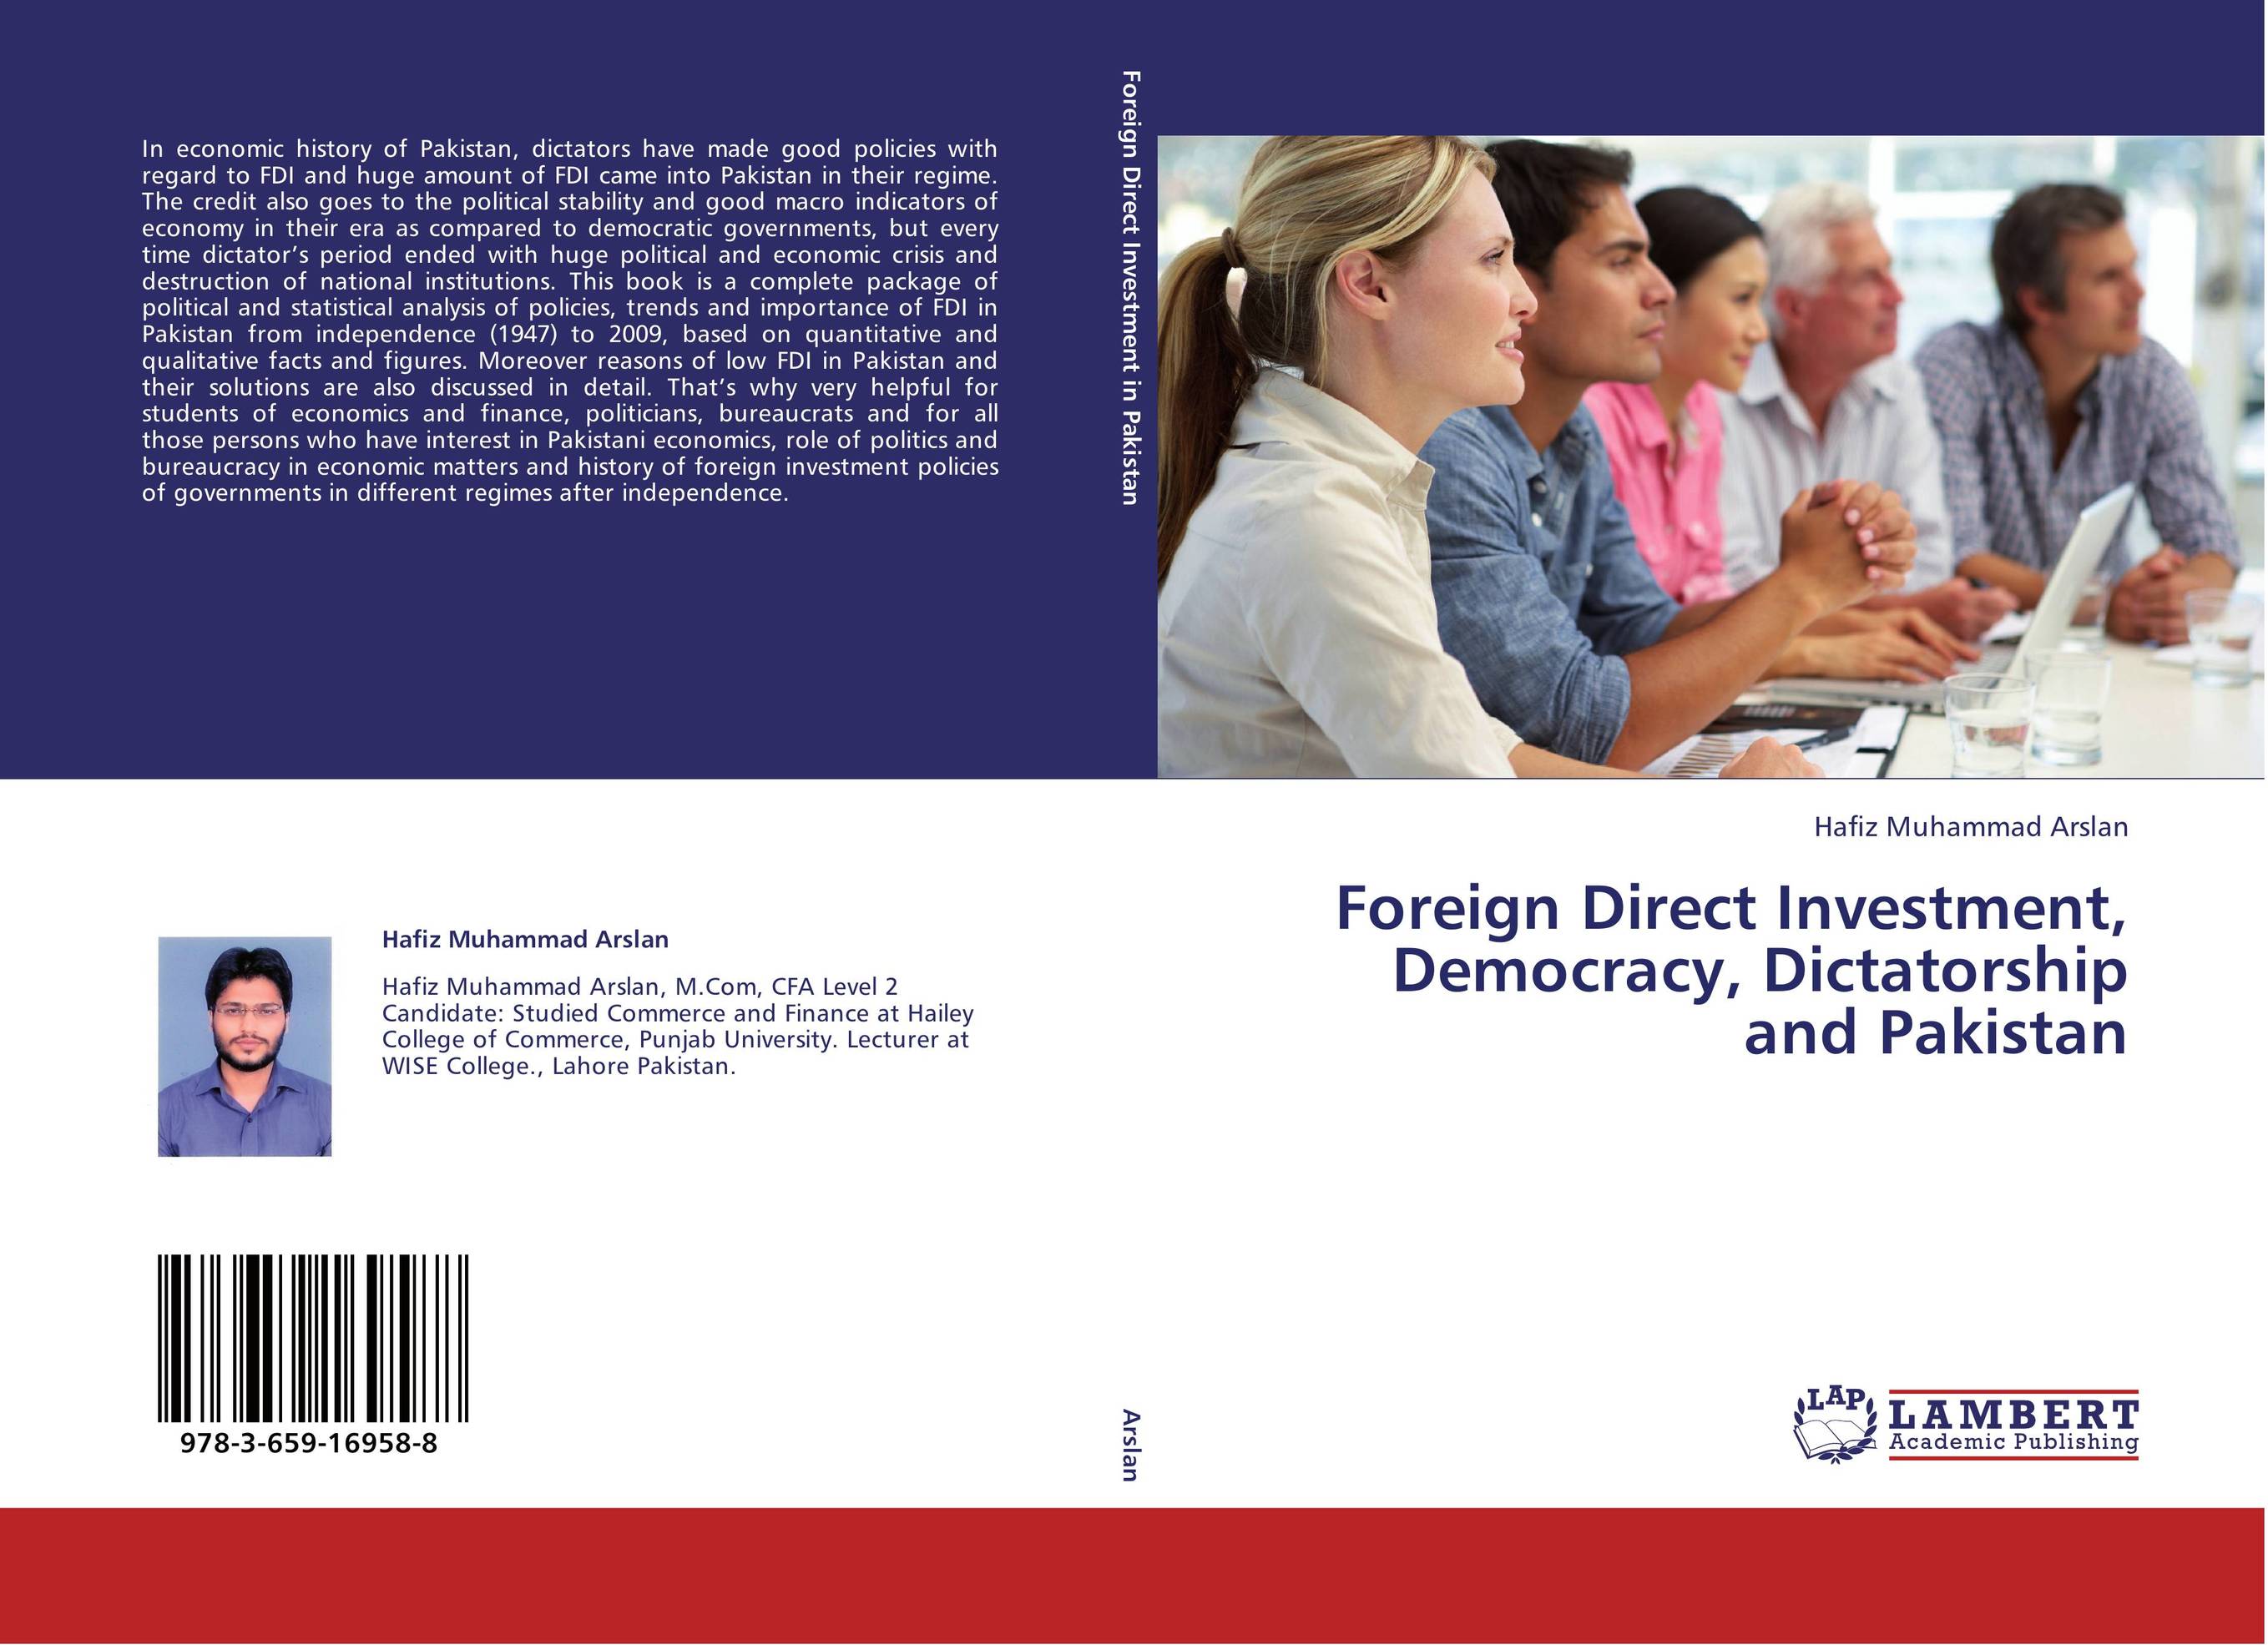 Foreign Direct Investment, Democracy, Dictatorship and Pakistan